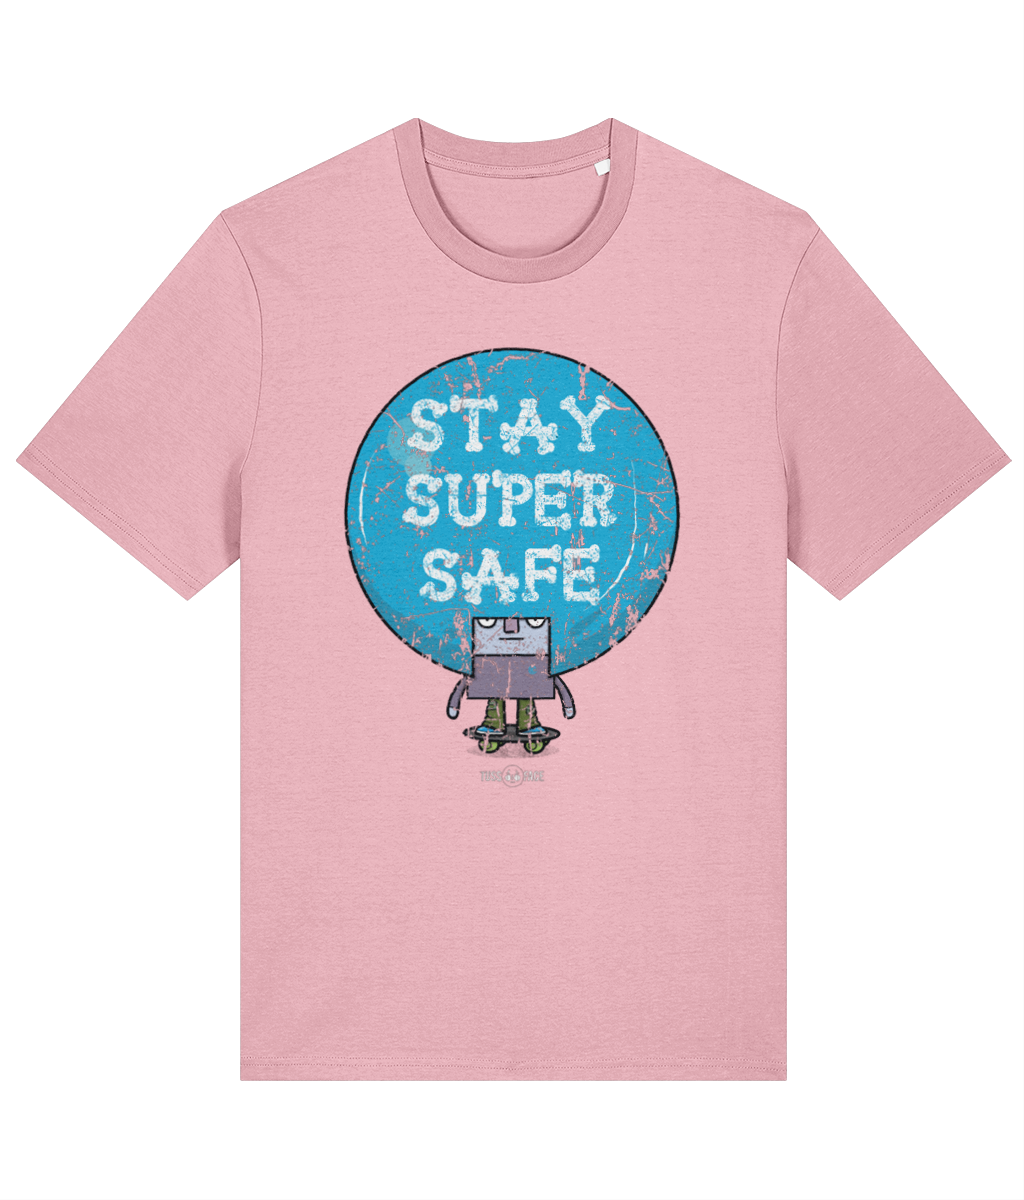 Stay Super Safe - TussFace T-shirt